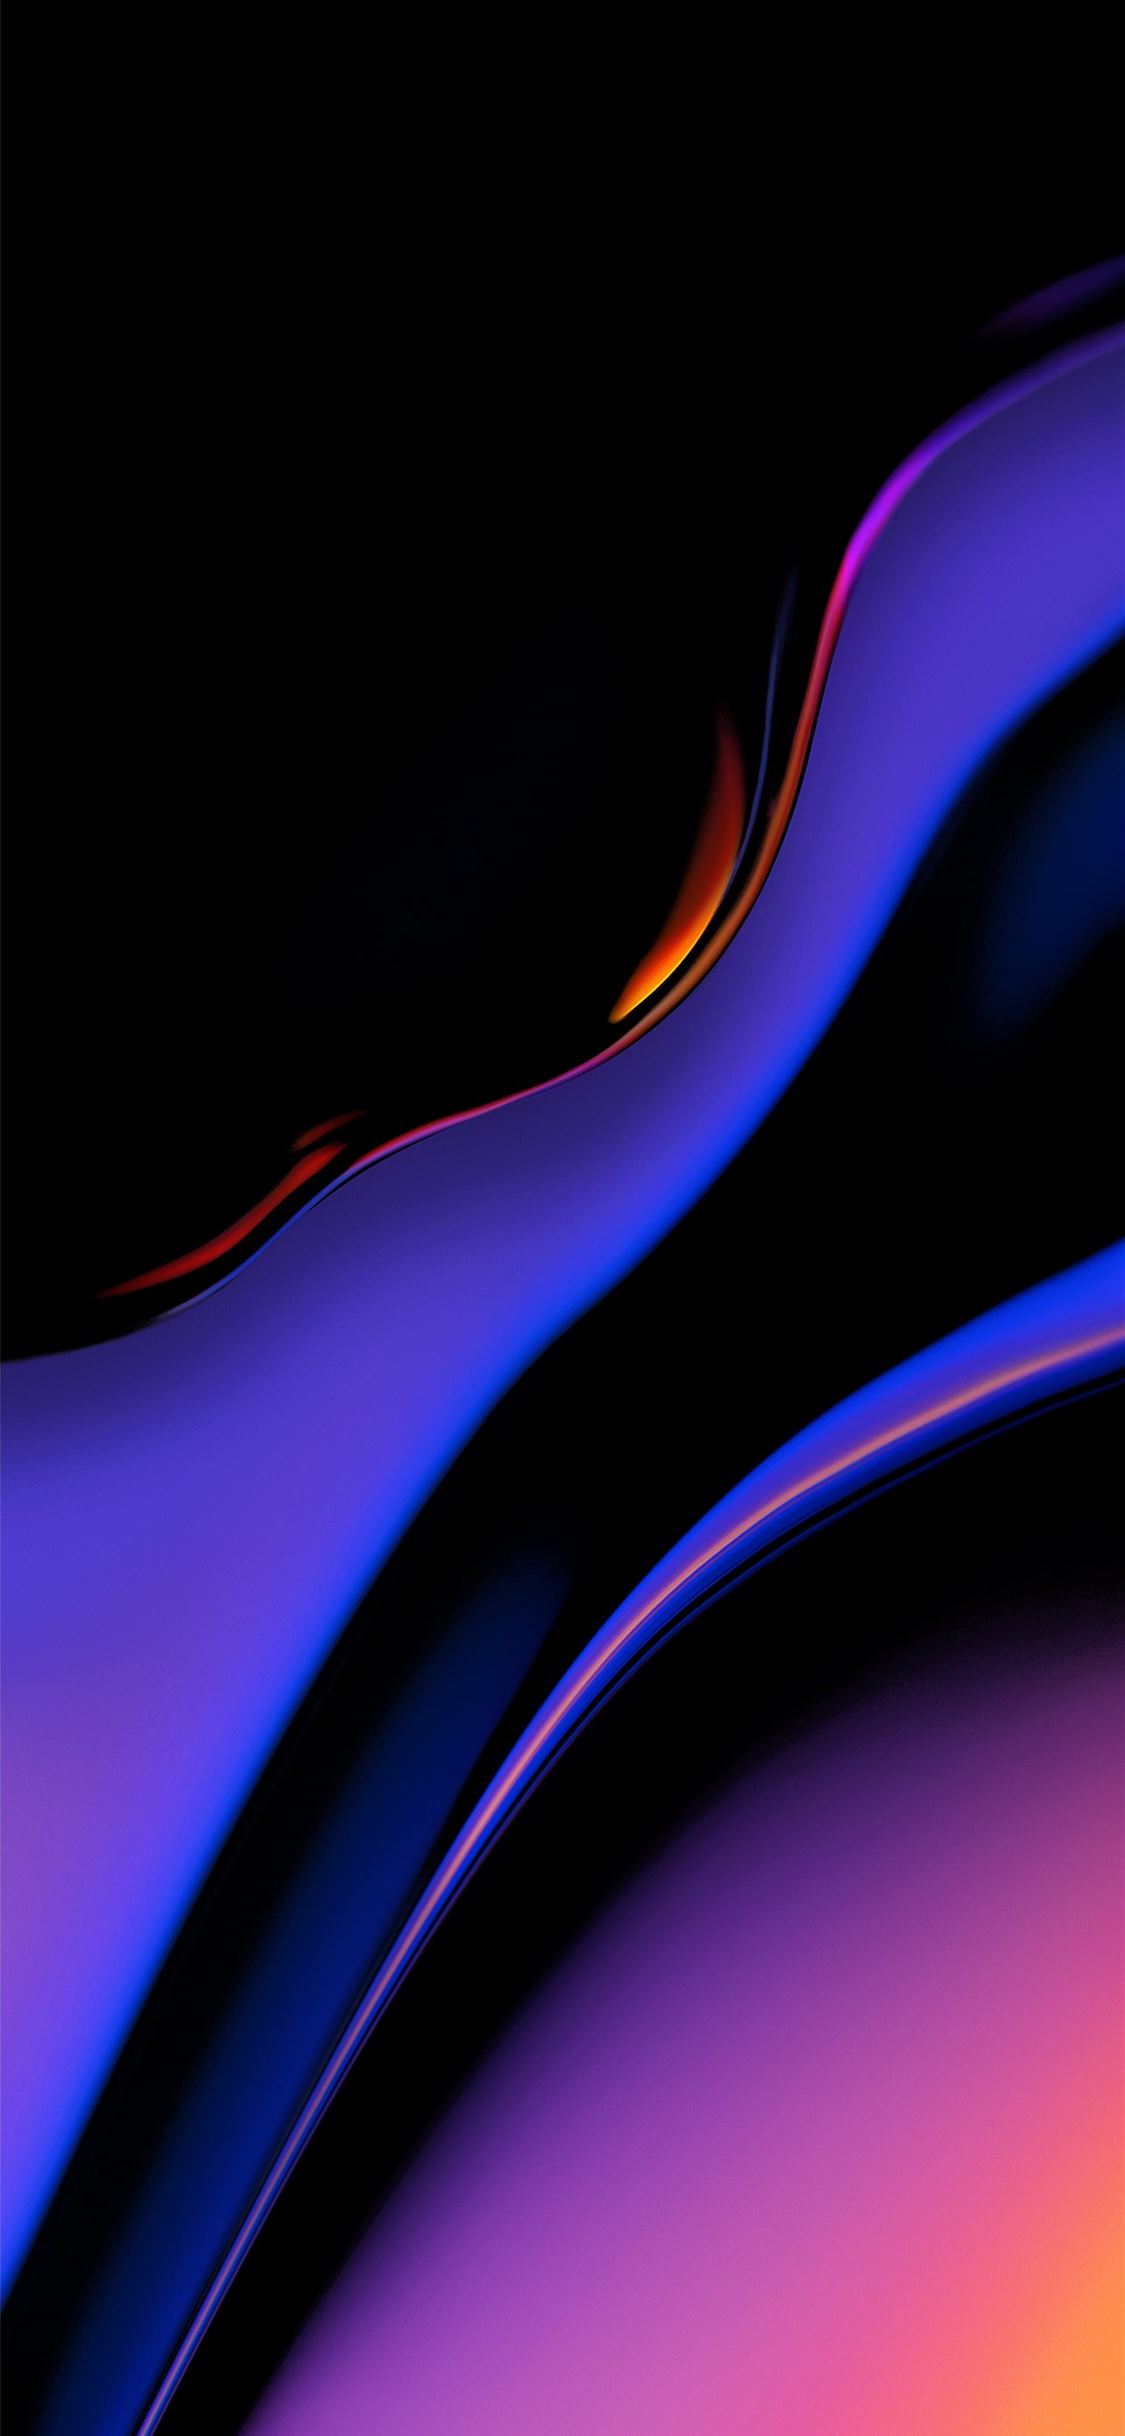 Get the OnePlus 9's new live wallpapers on any Android phone | Canada News  Media